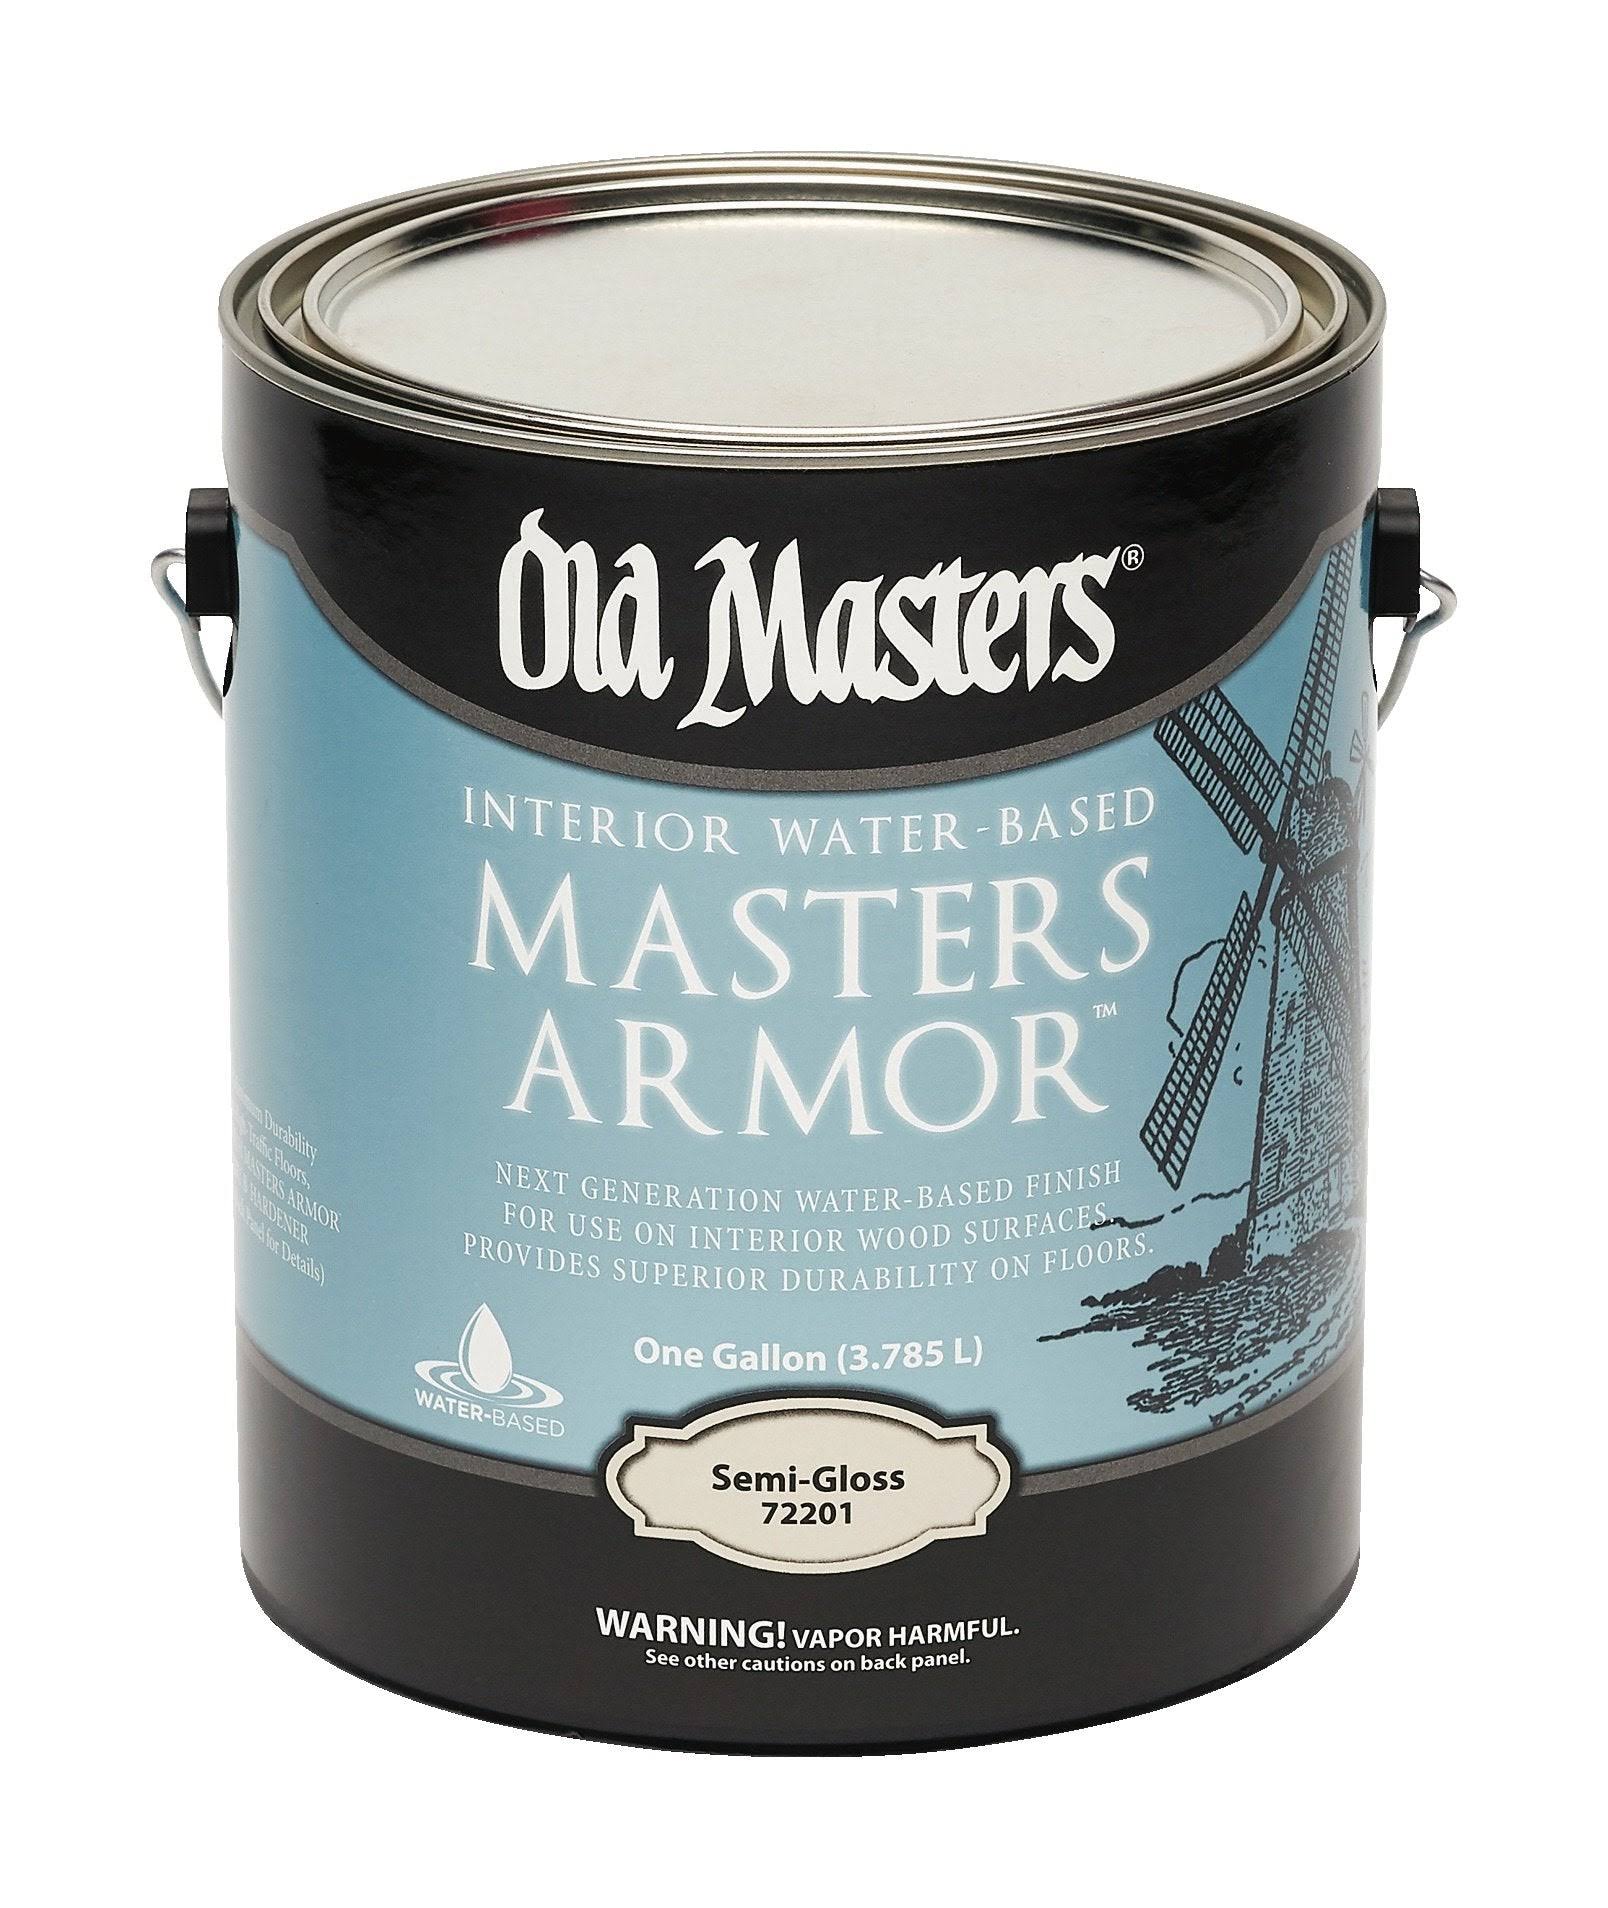 Old Masters 72201 Wood Stain, Semi-Gloss, 1 Gal 2 Pack